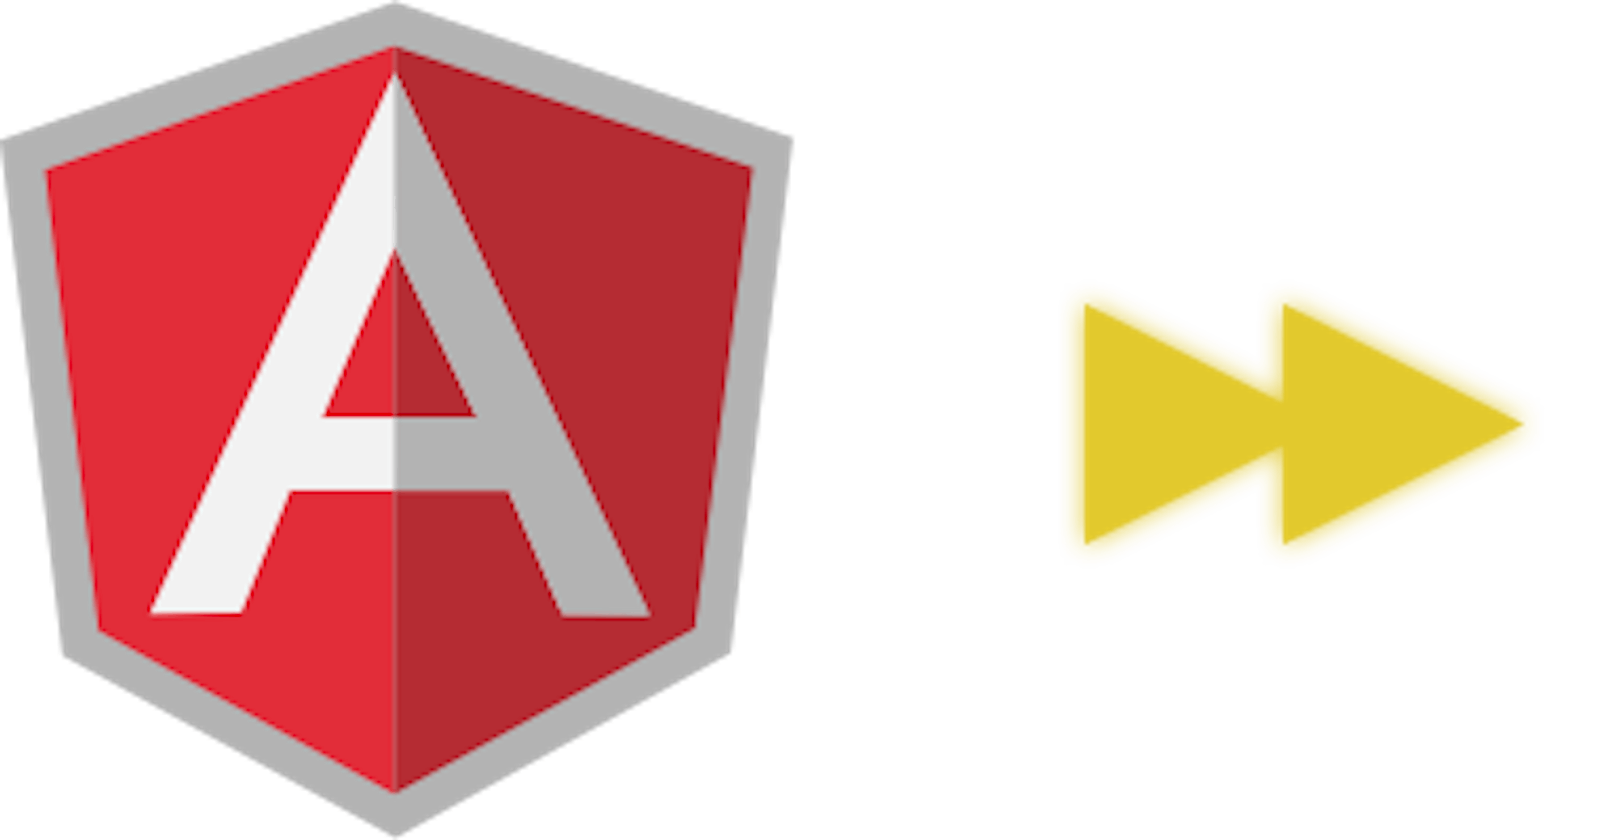 Getting to Grips with React (as an Angular developer) – Angularity